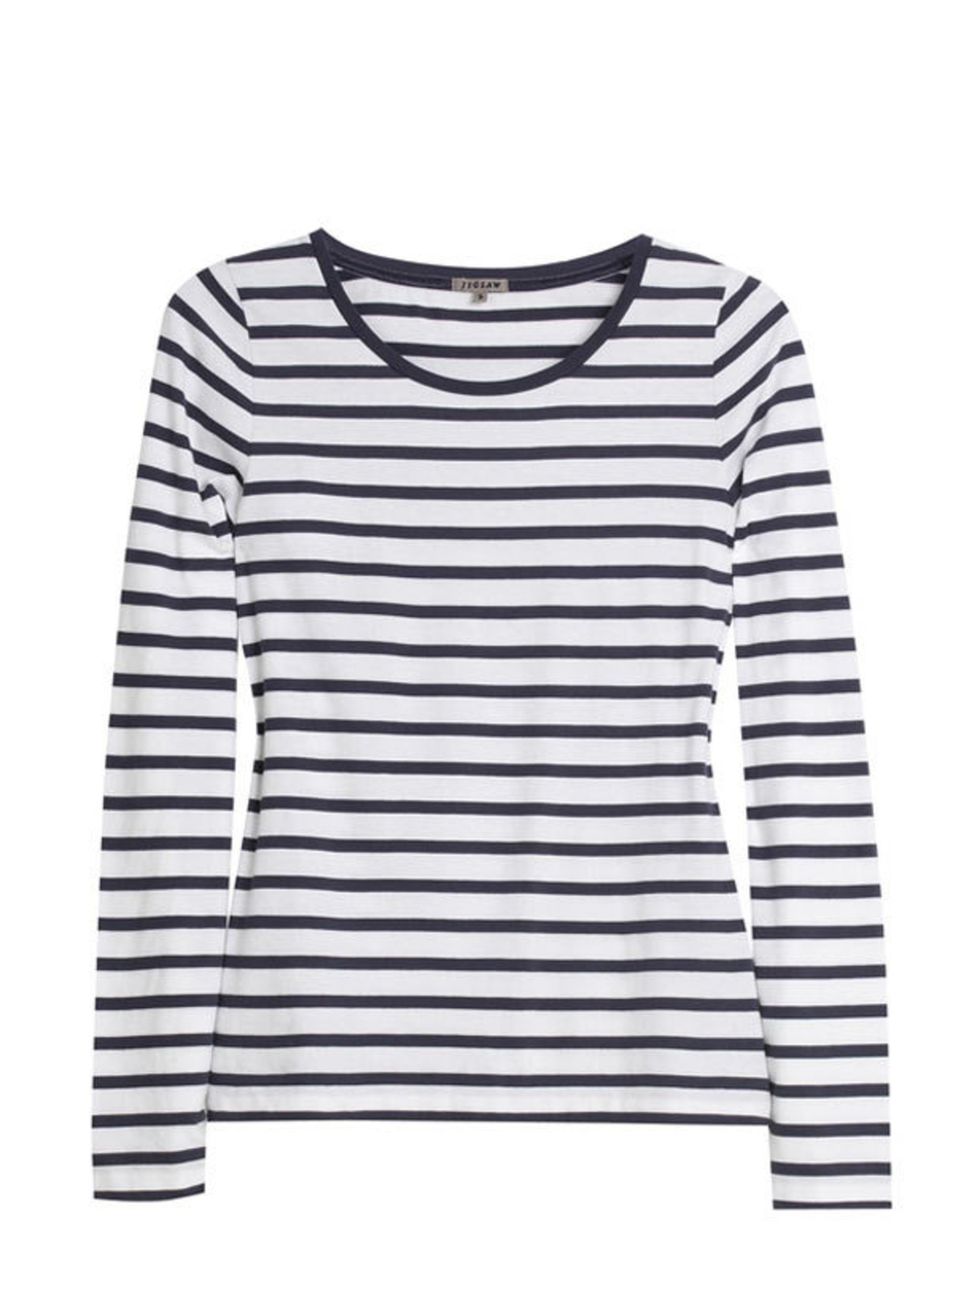 <p>Jersey stripe top, £34, by <a href="http://www.jigsaw-online.com/fashion/1000723/J01512/BL050/womens/shirts-and-tops/retro-jersey-stripe-top-new">Jigsaw</a></p>